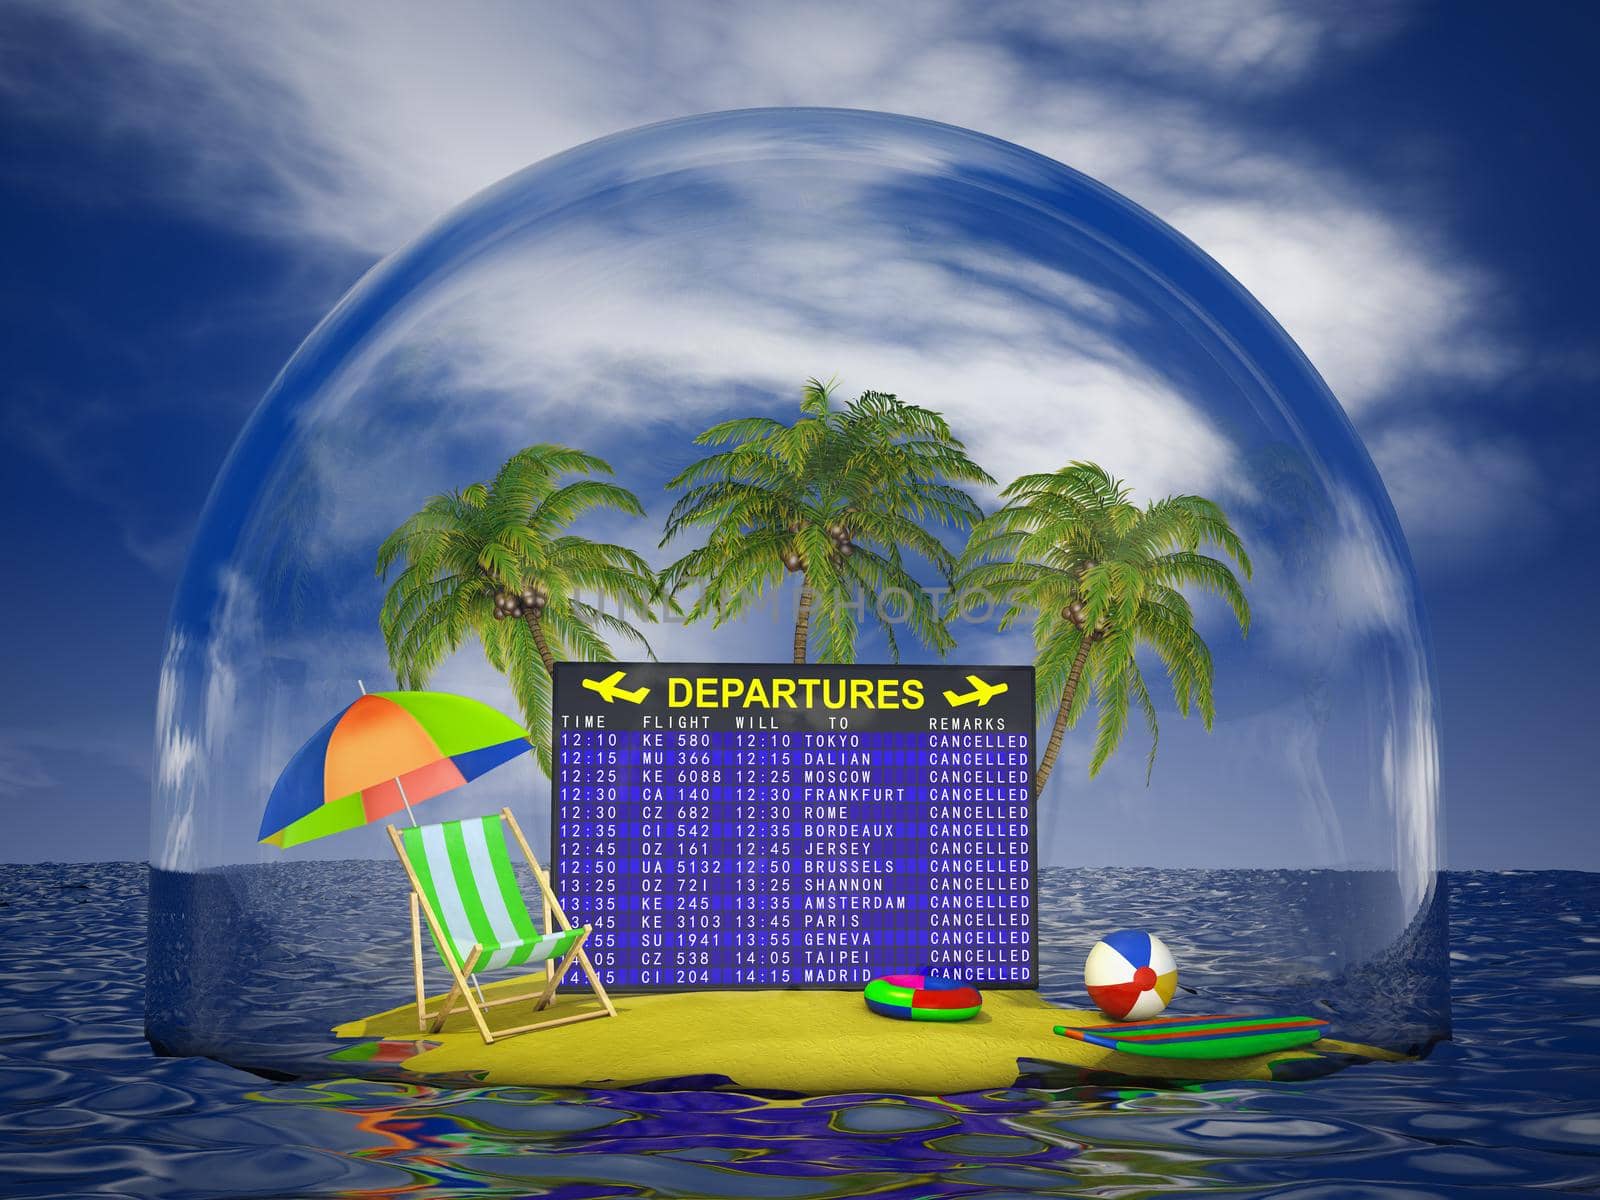 Airport departure board with canceled flights on the domed island. 3d render.